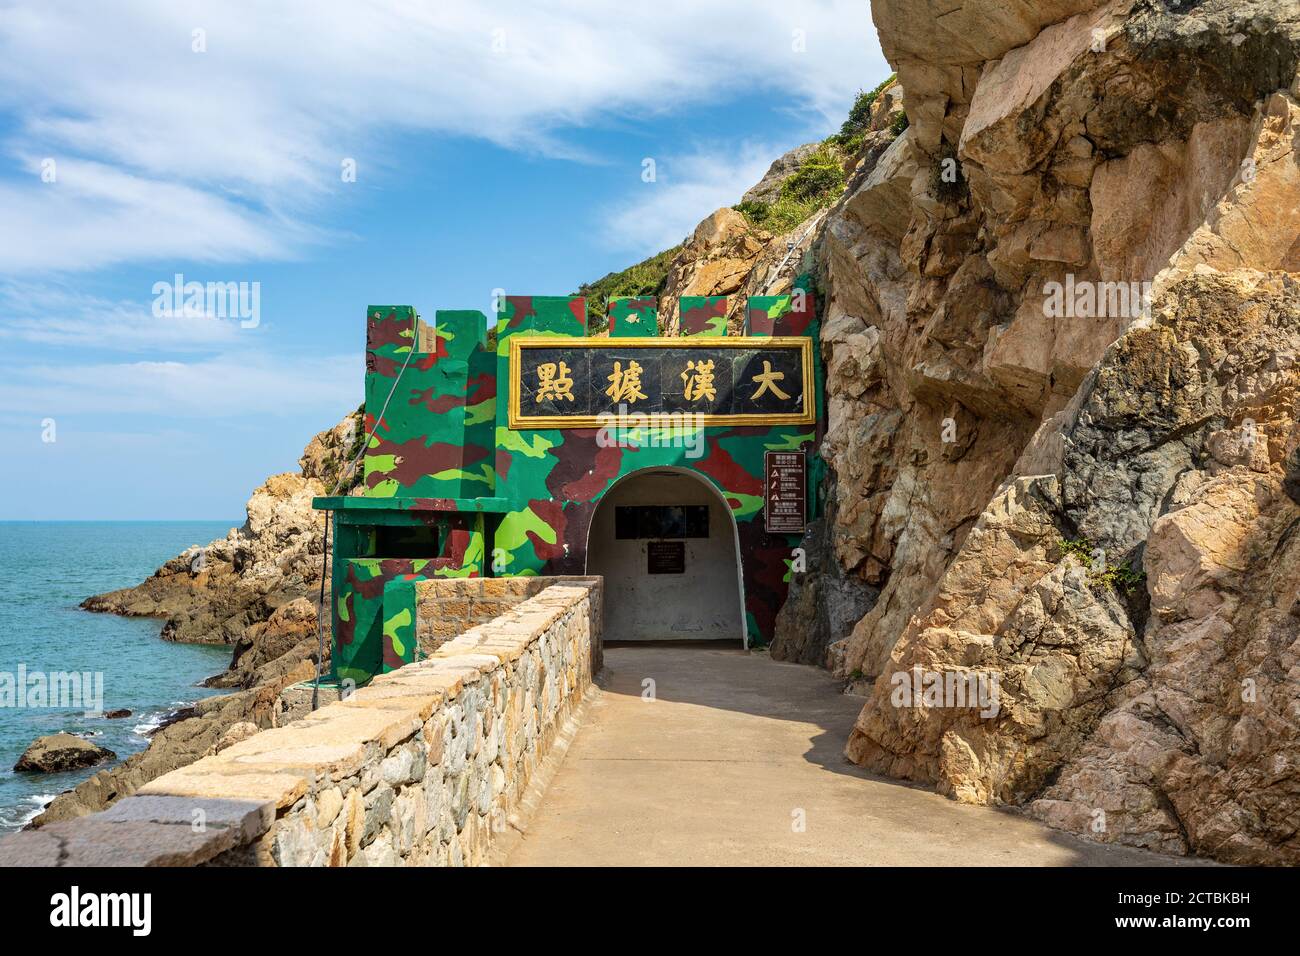 Dahan stronghold in Matsu, Taiwan. The chinese text is 'Dahan Stronghold'. Stock Photo